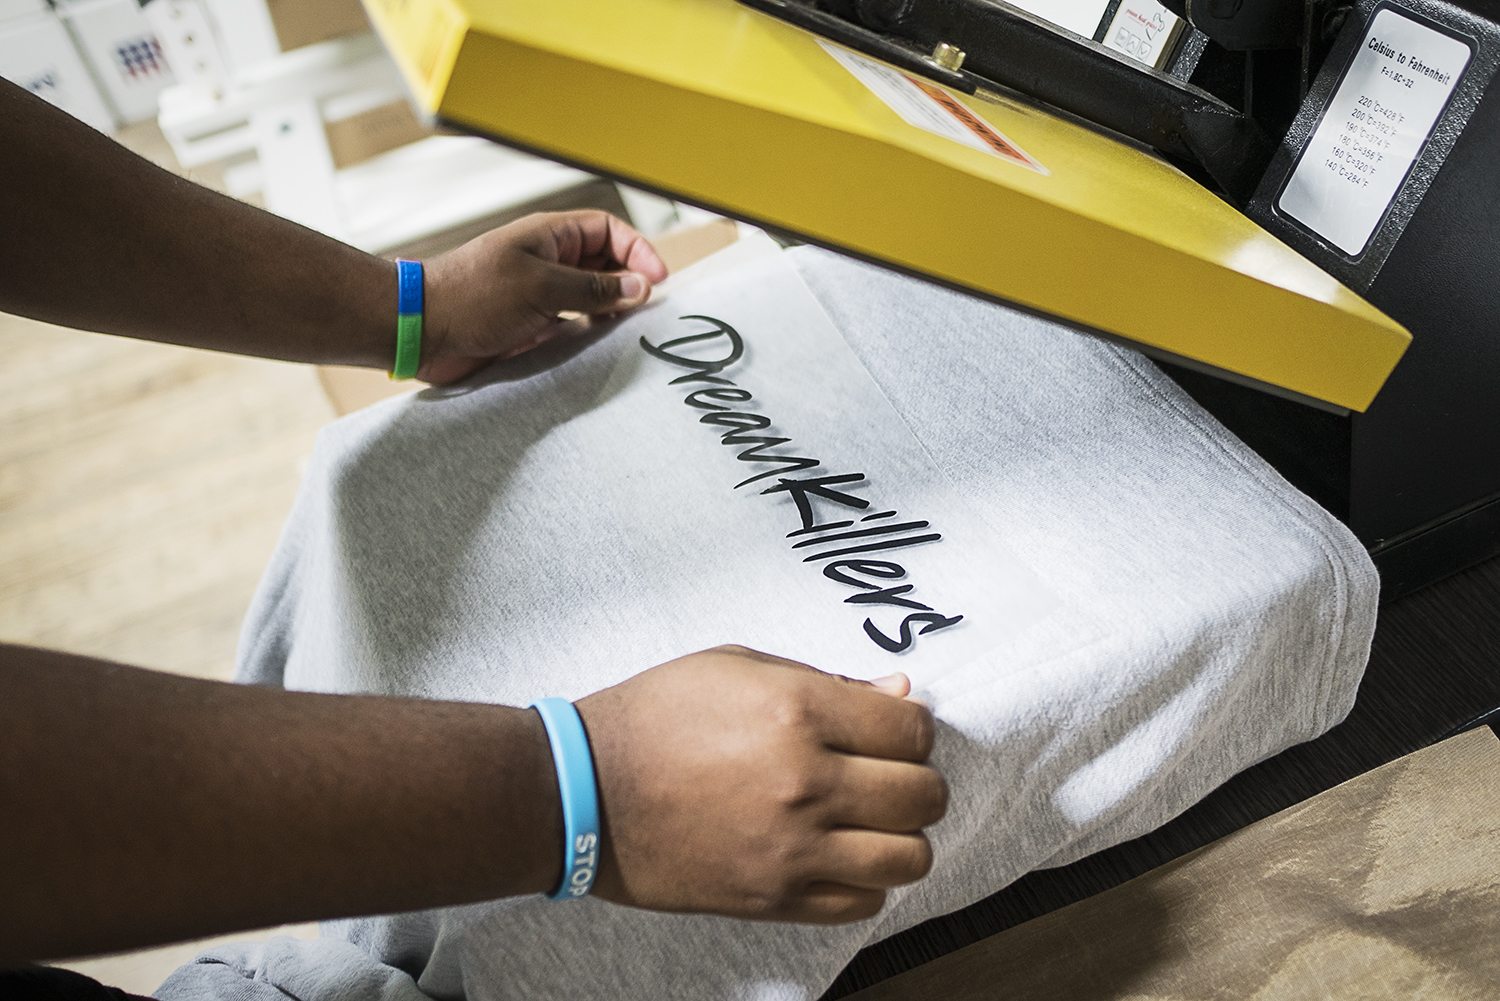 In the production area of the new GoodBoy Clothing storefront in downtown Flint, production manager Andre McGee, 23, of Flint runs application tests of vinyl lettering onto clothing garments in preparation for the grand opening event on Friday, Novem